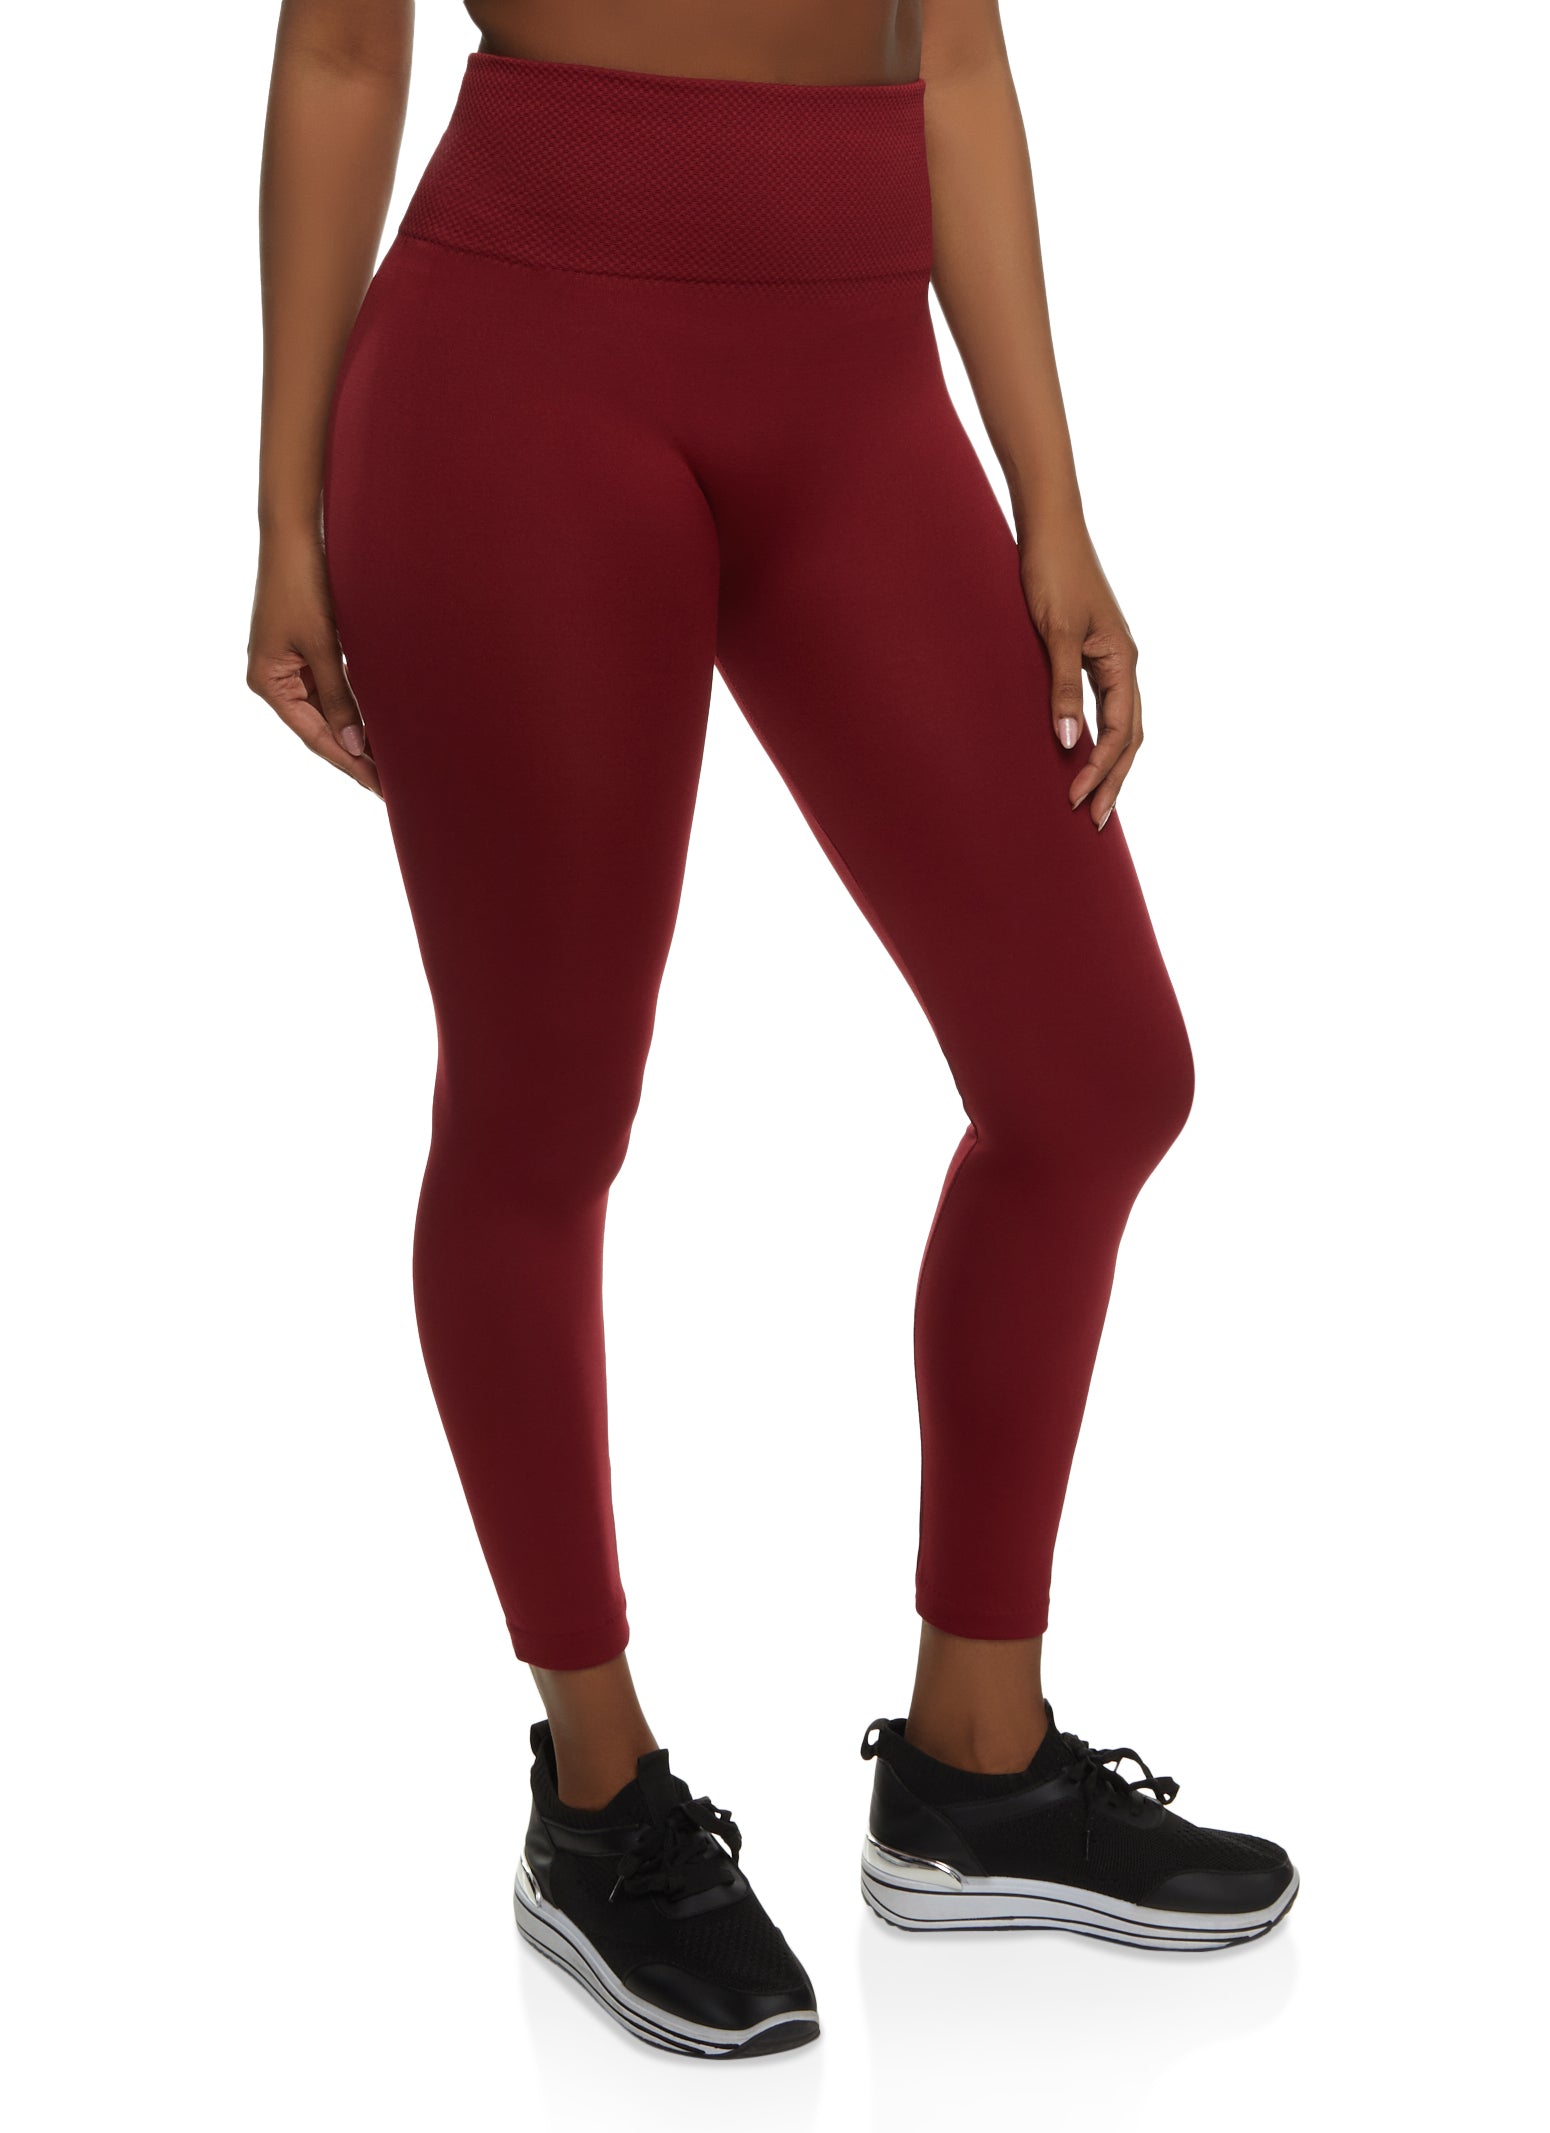 Womens Leggings | Solid Red Leggings | Yoga Pants | Footless Tights |  No-Roll Waistband